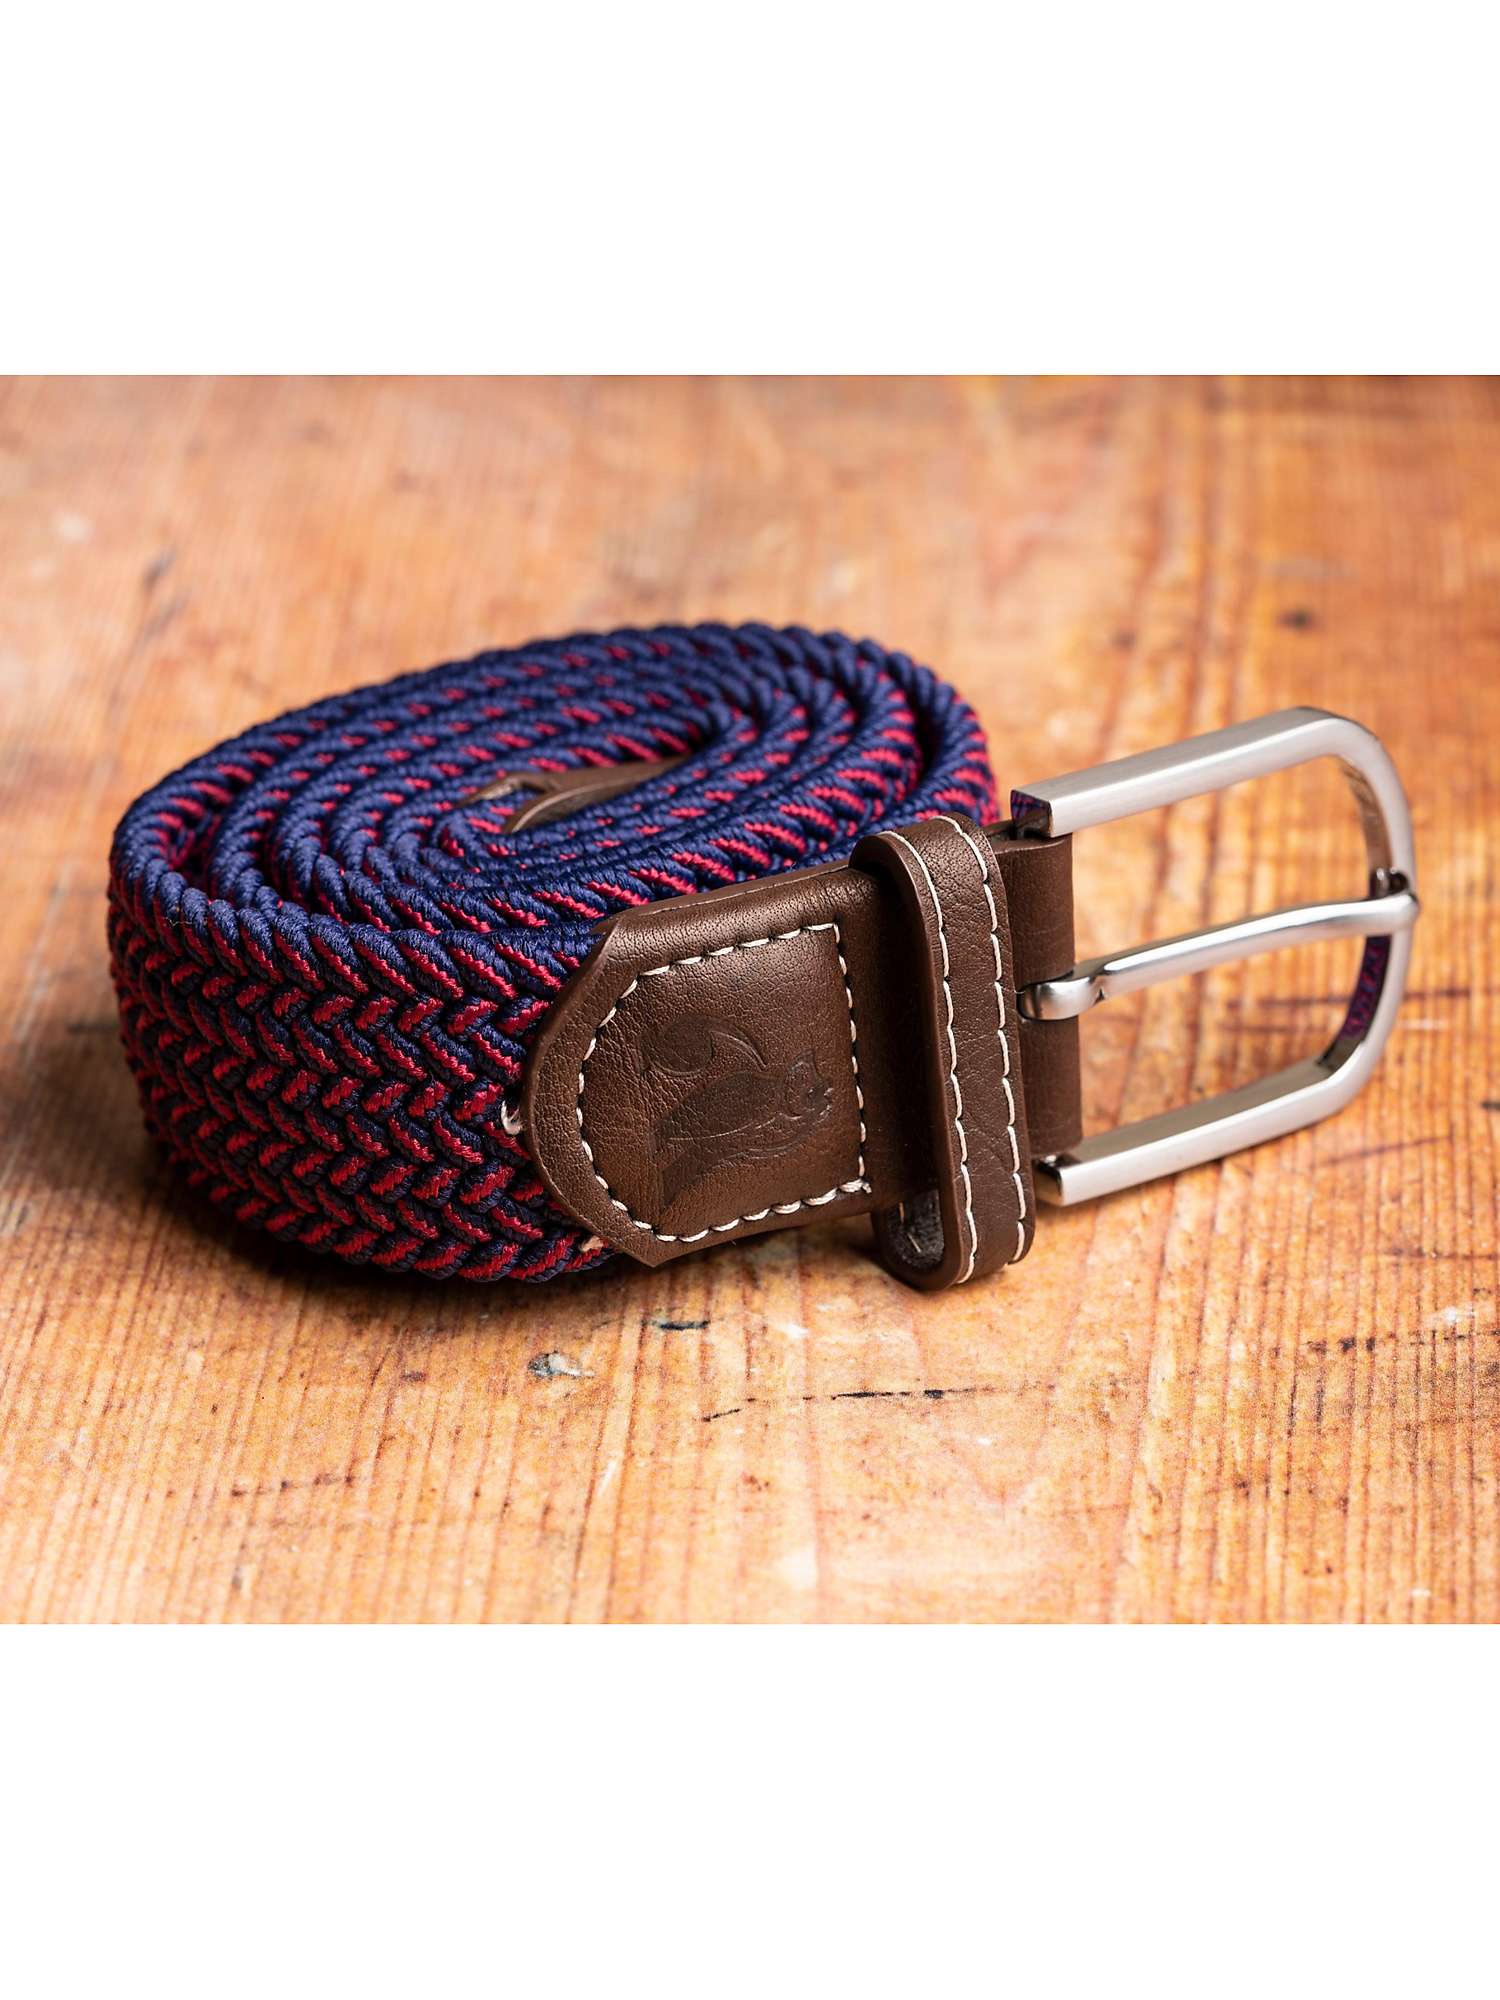 Buy Swole Panda ZigZag Recycled Woven Belt Online at johnlewis.com